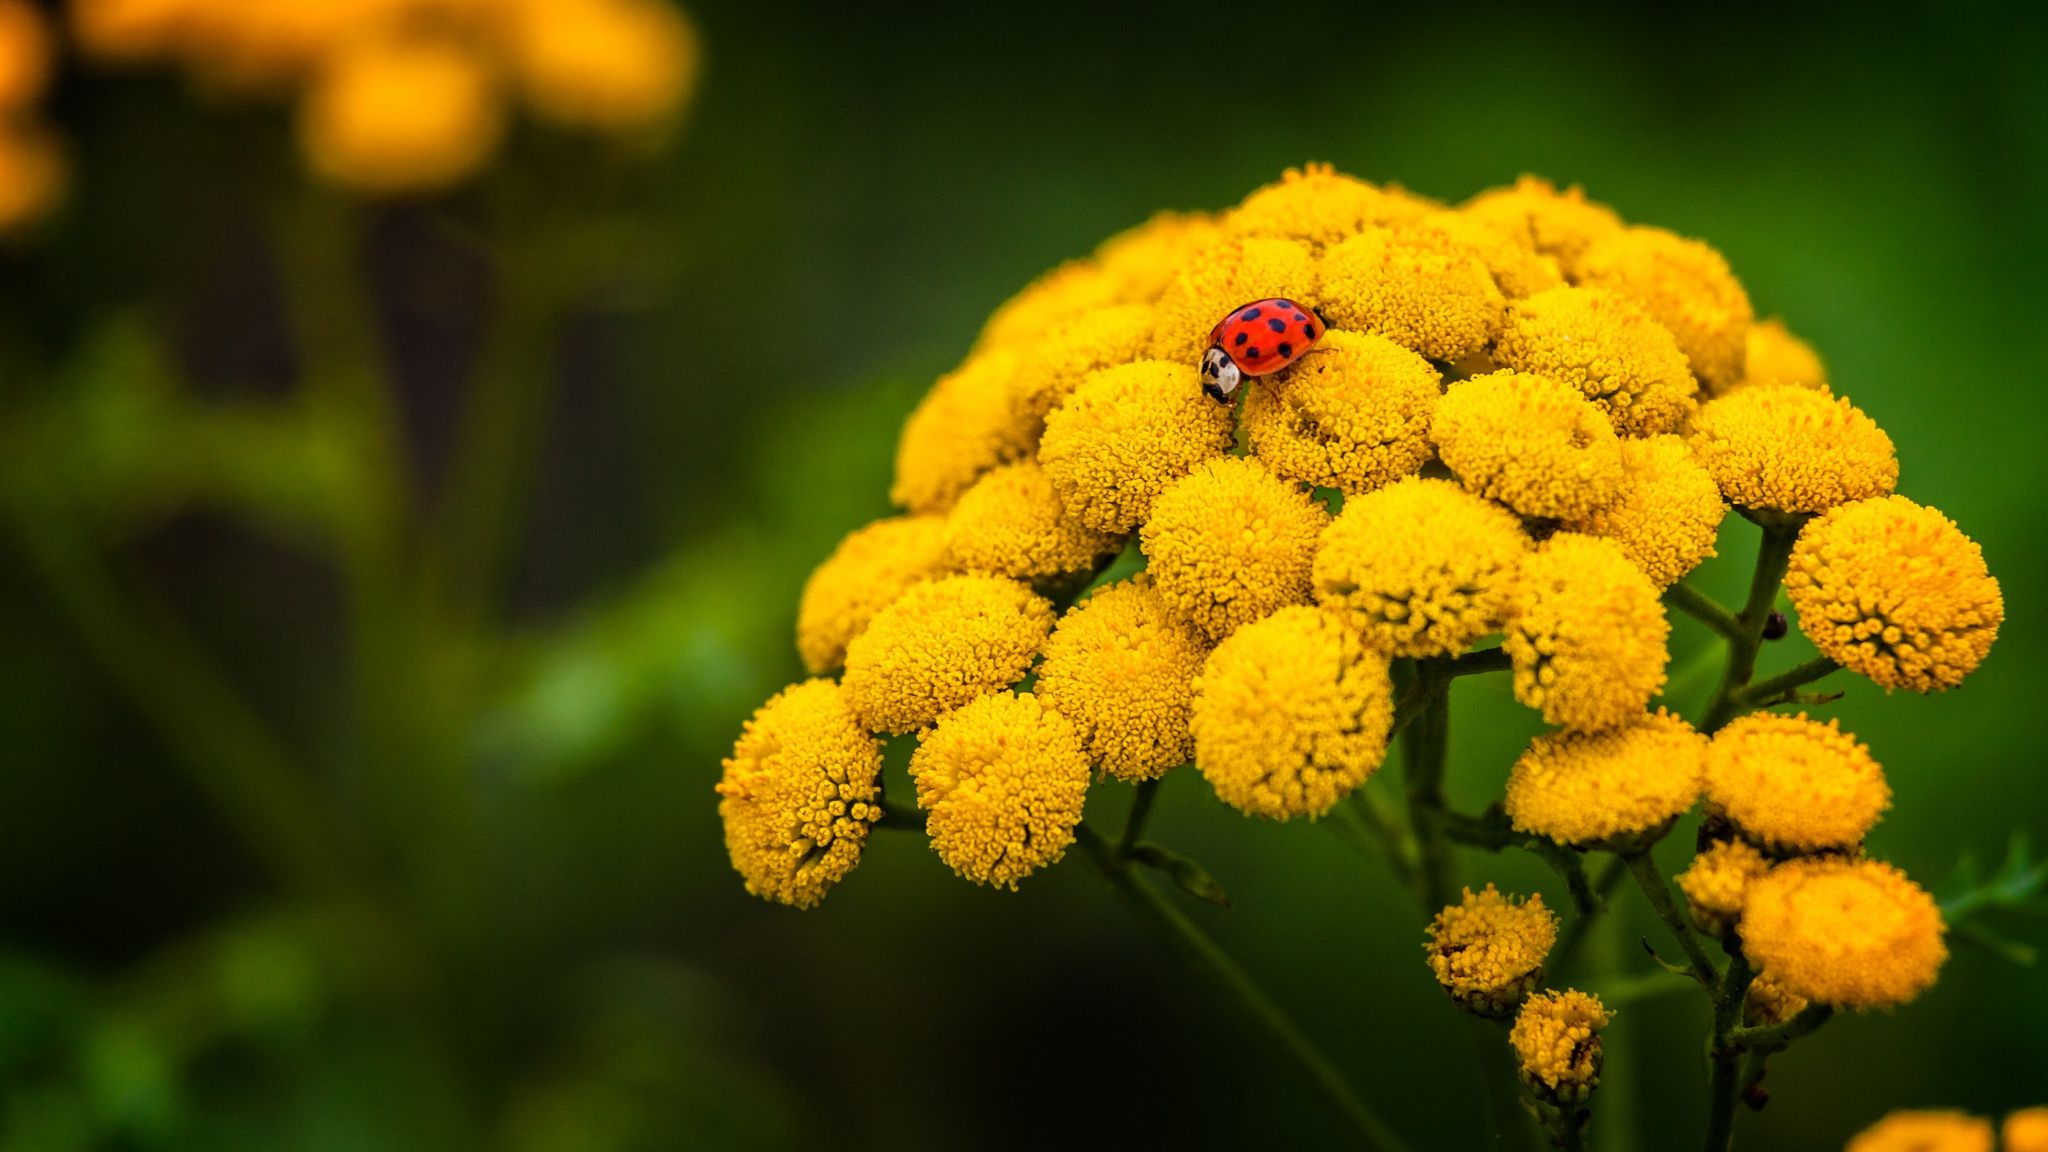 LazyBUG and Flowers Wallpaper Full HD Free Download